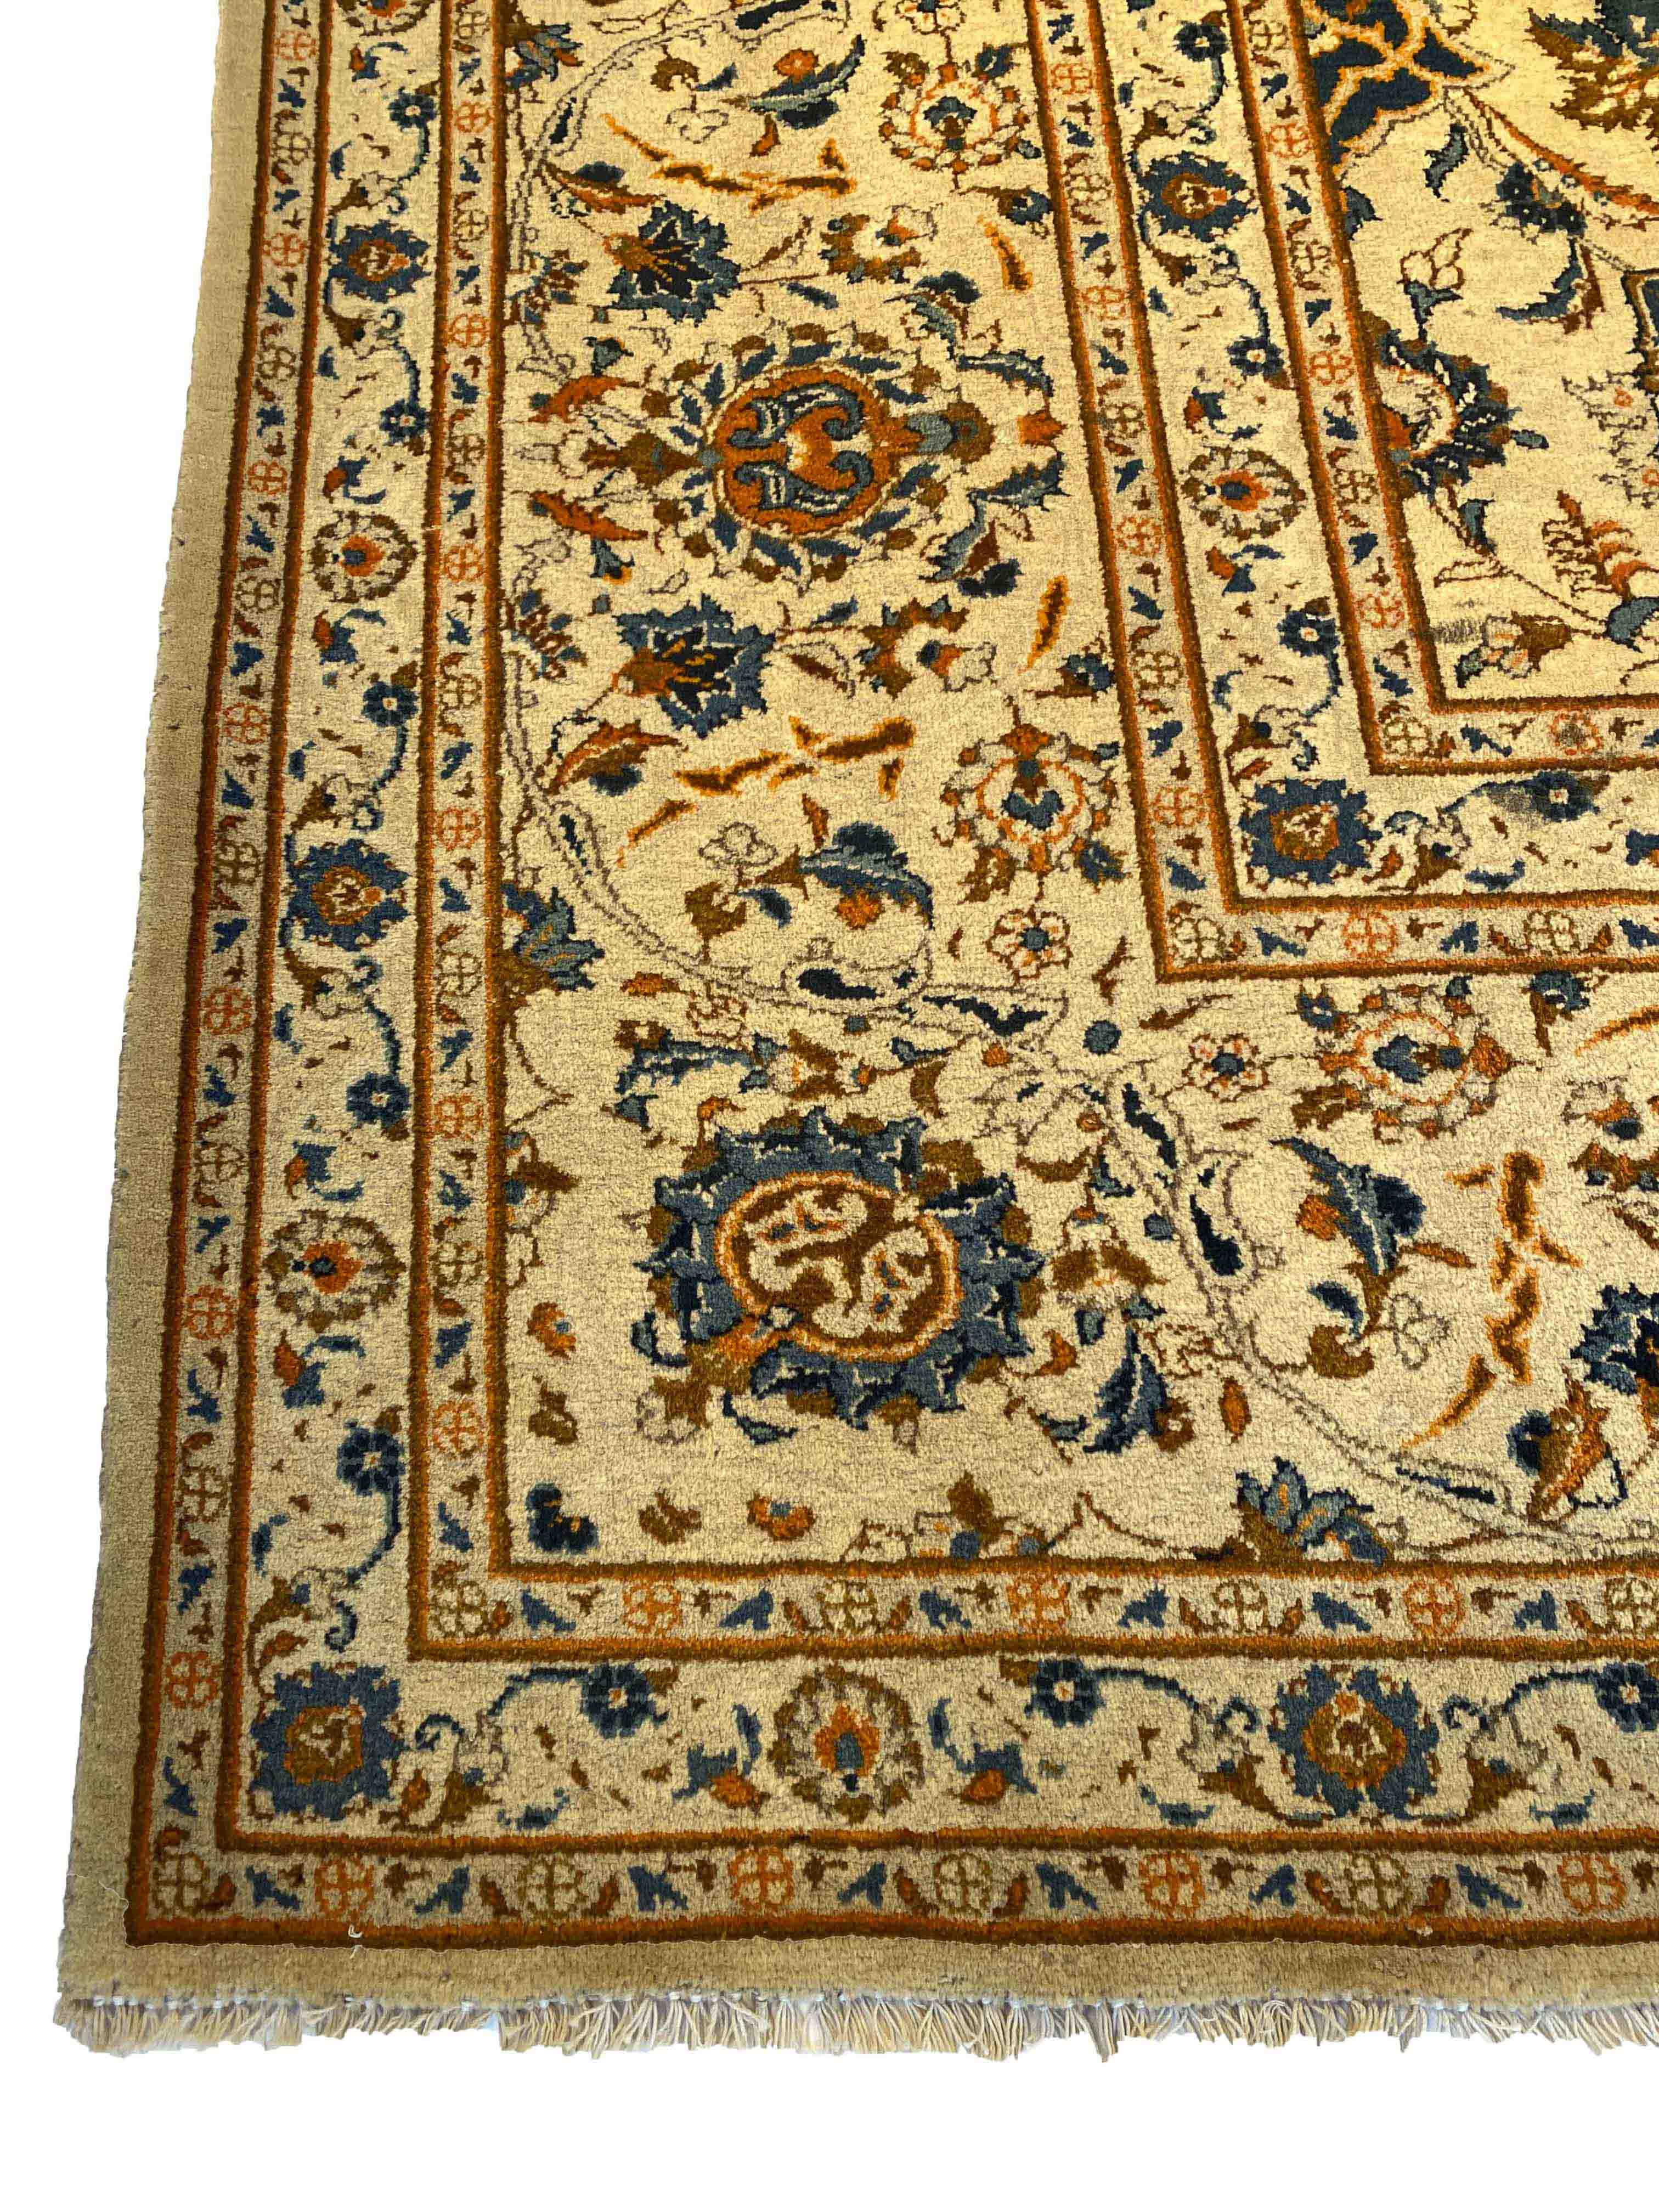 Carpet, Keshan, good condition with minor wear, 422 x 295 cm - The carpet can only be viewed and